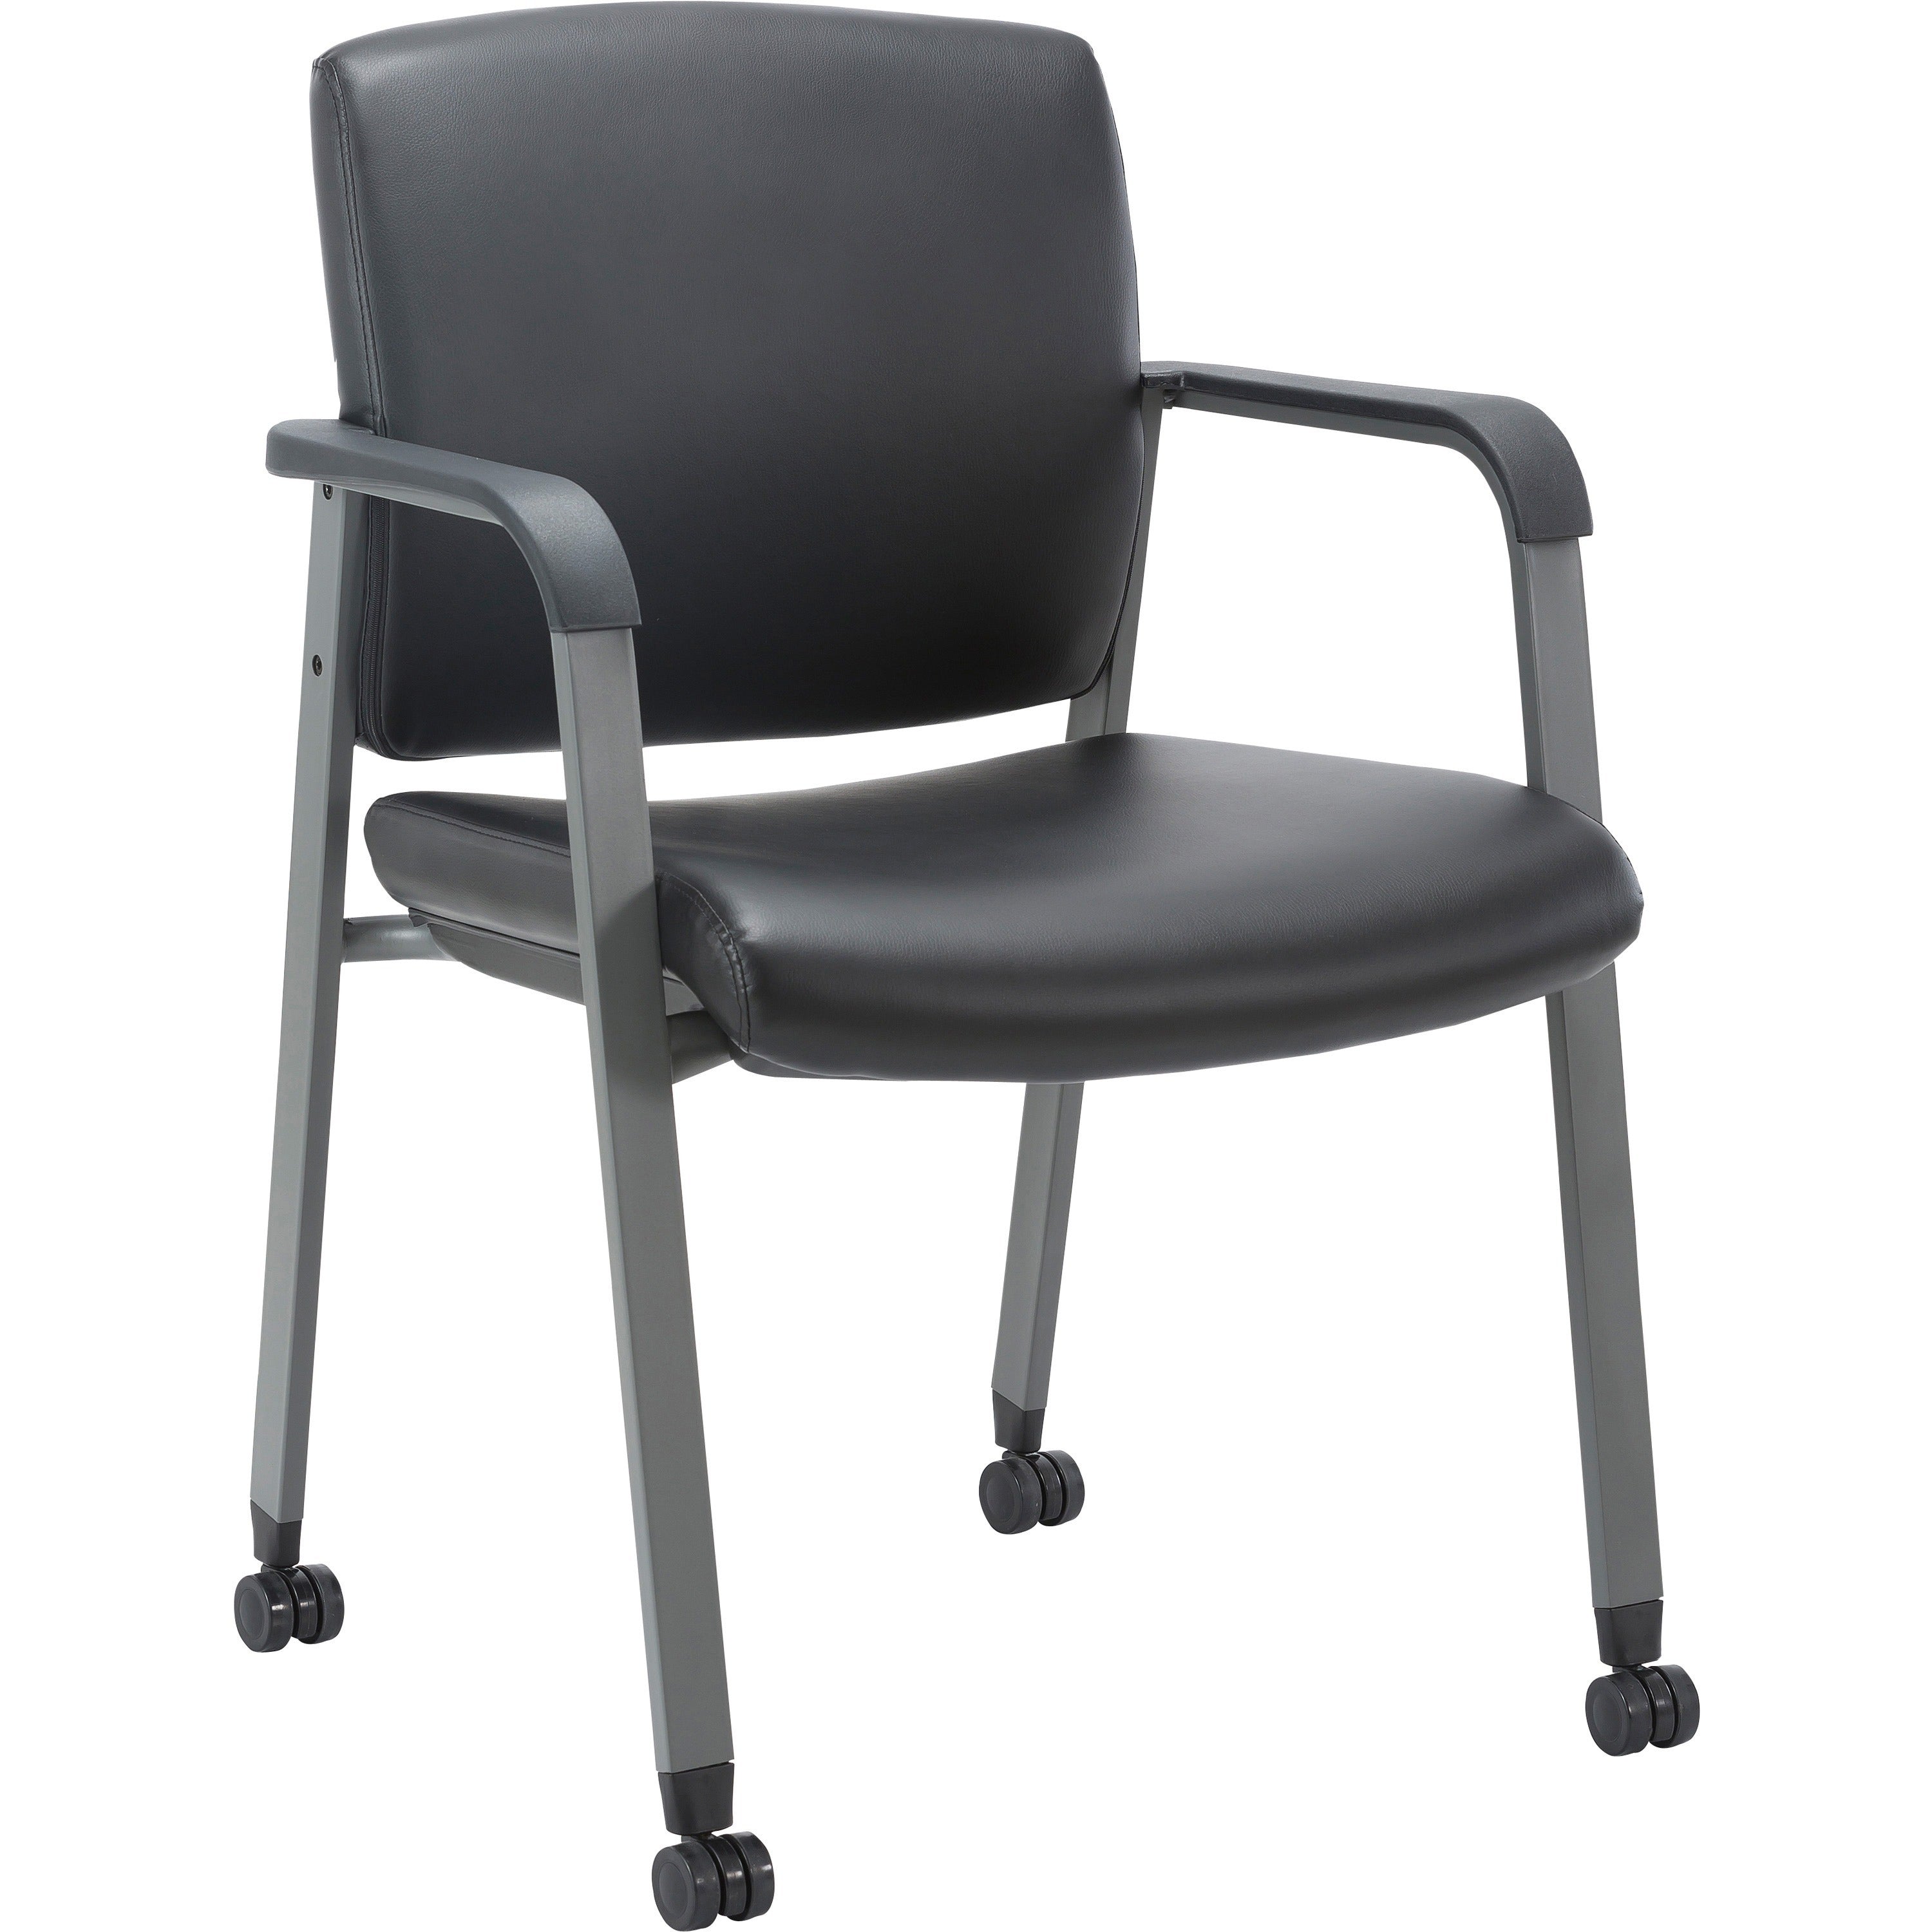 lorell-healthcare-upholstery-guest-chair-with-casters-vinyl-seat-vinyl-back-steel-frame-square-base-black-armrest-1-each_llr30951 - 1